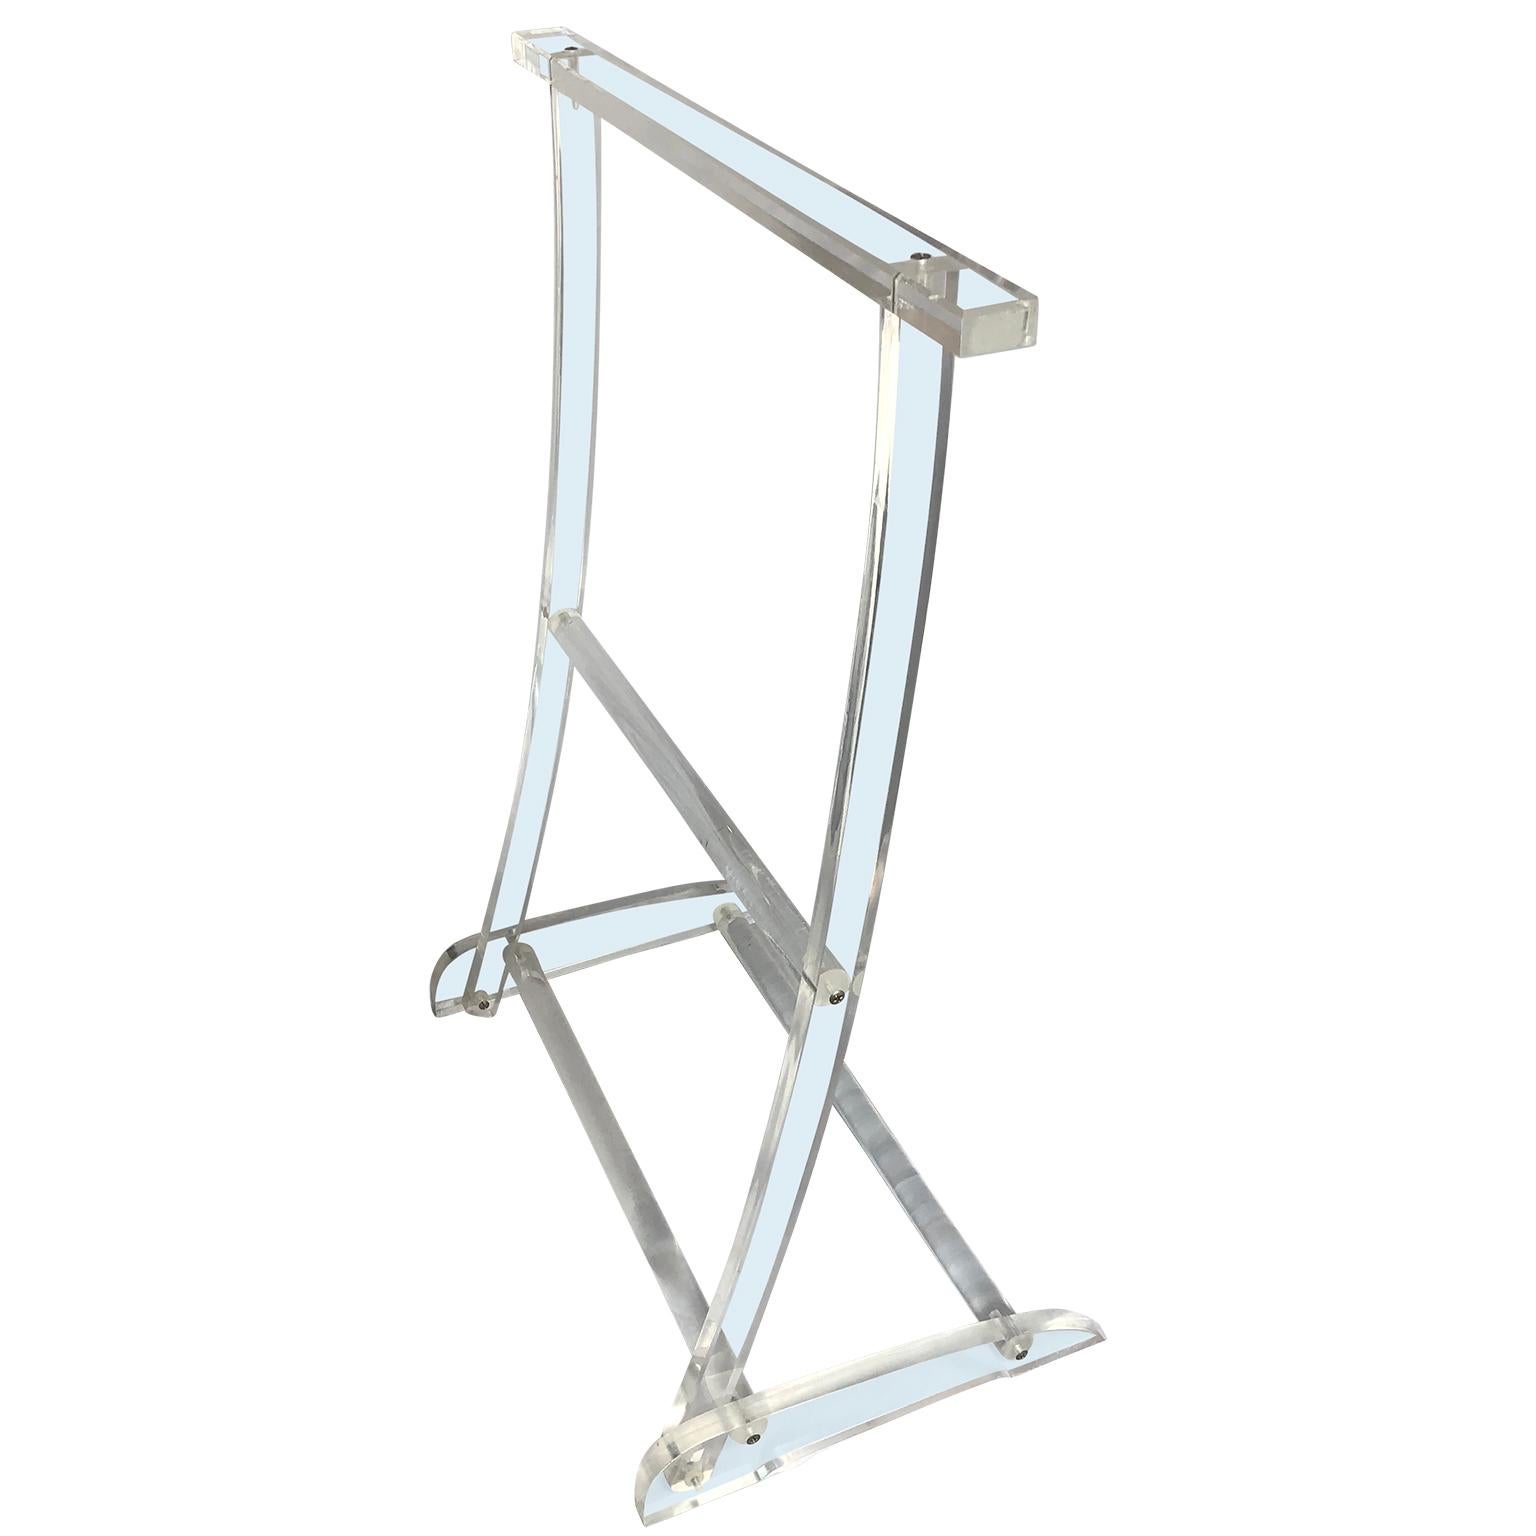 Hollywood Regency Lucite towel rack by Scheibe

The depth of the rack assembled is 13 inches.